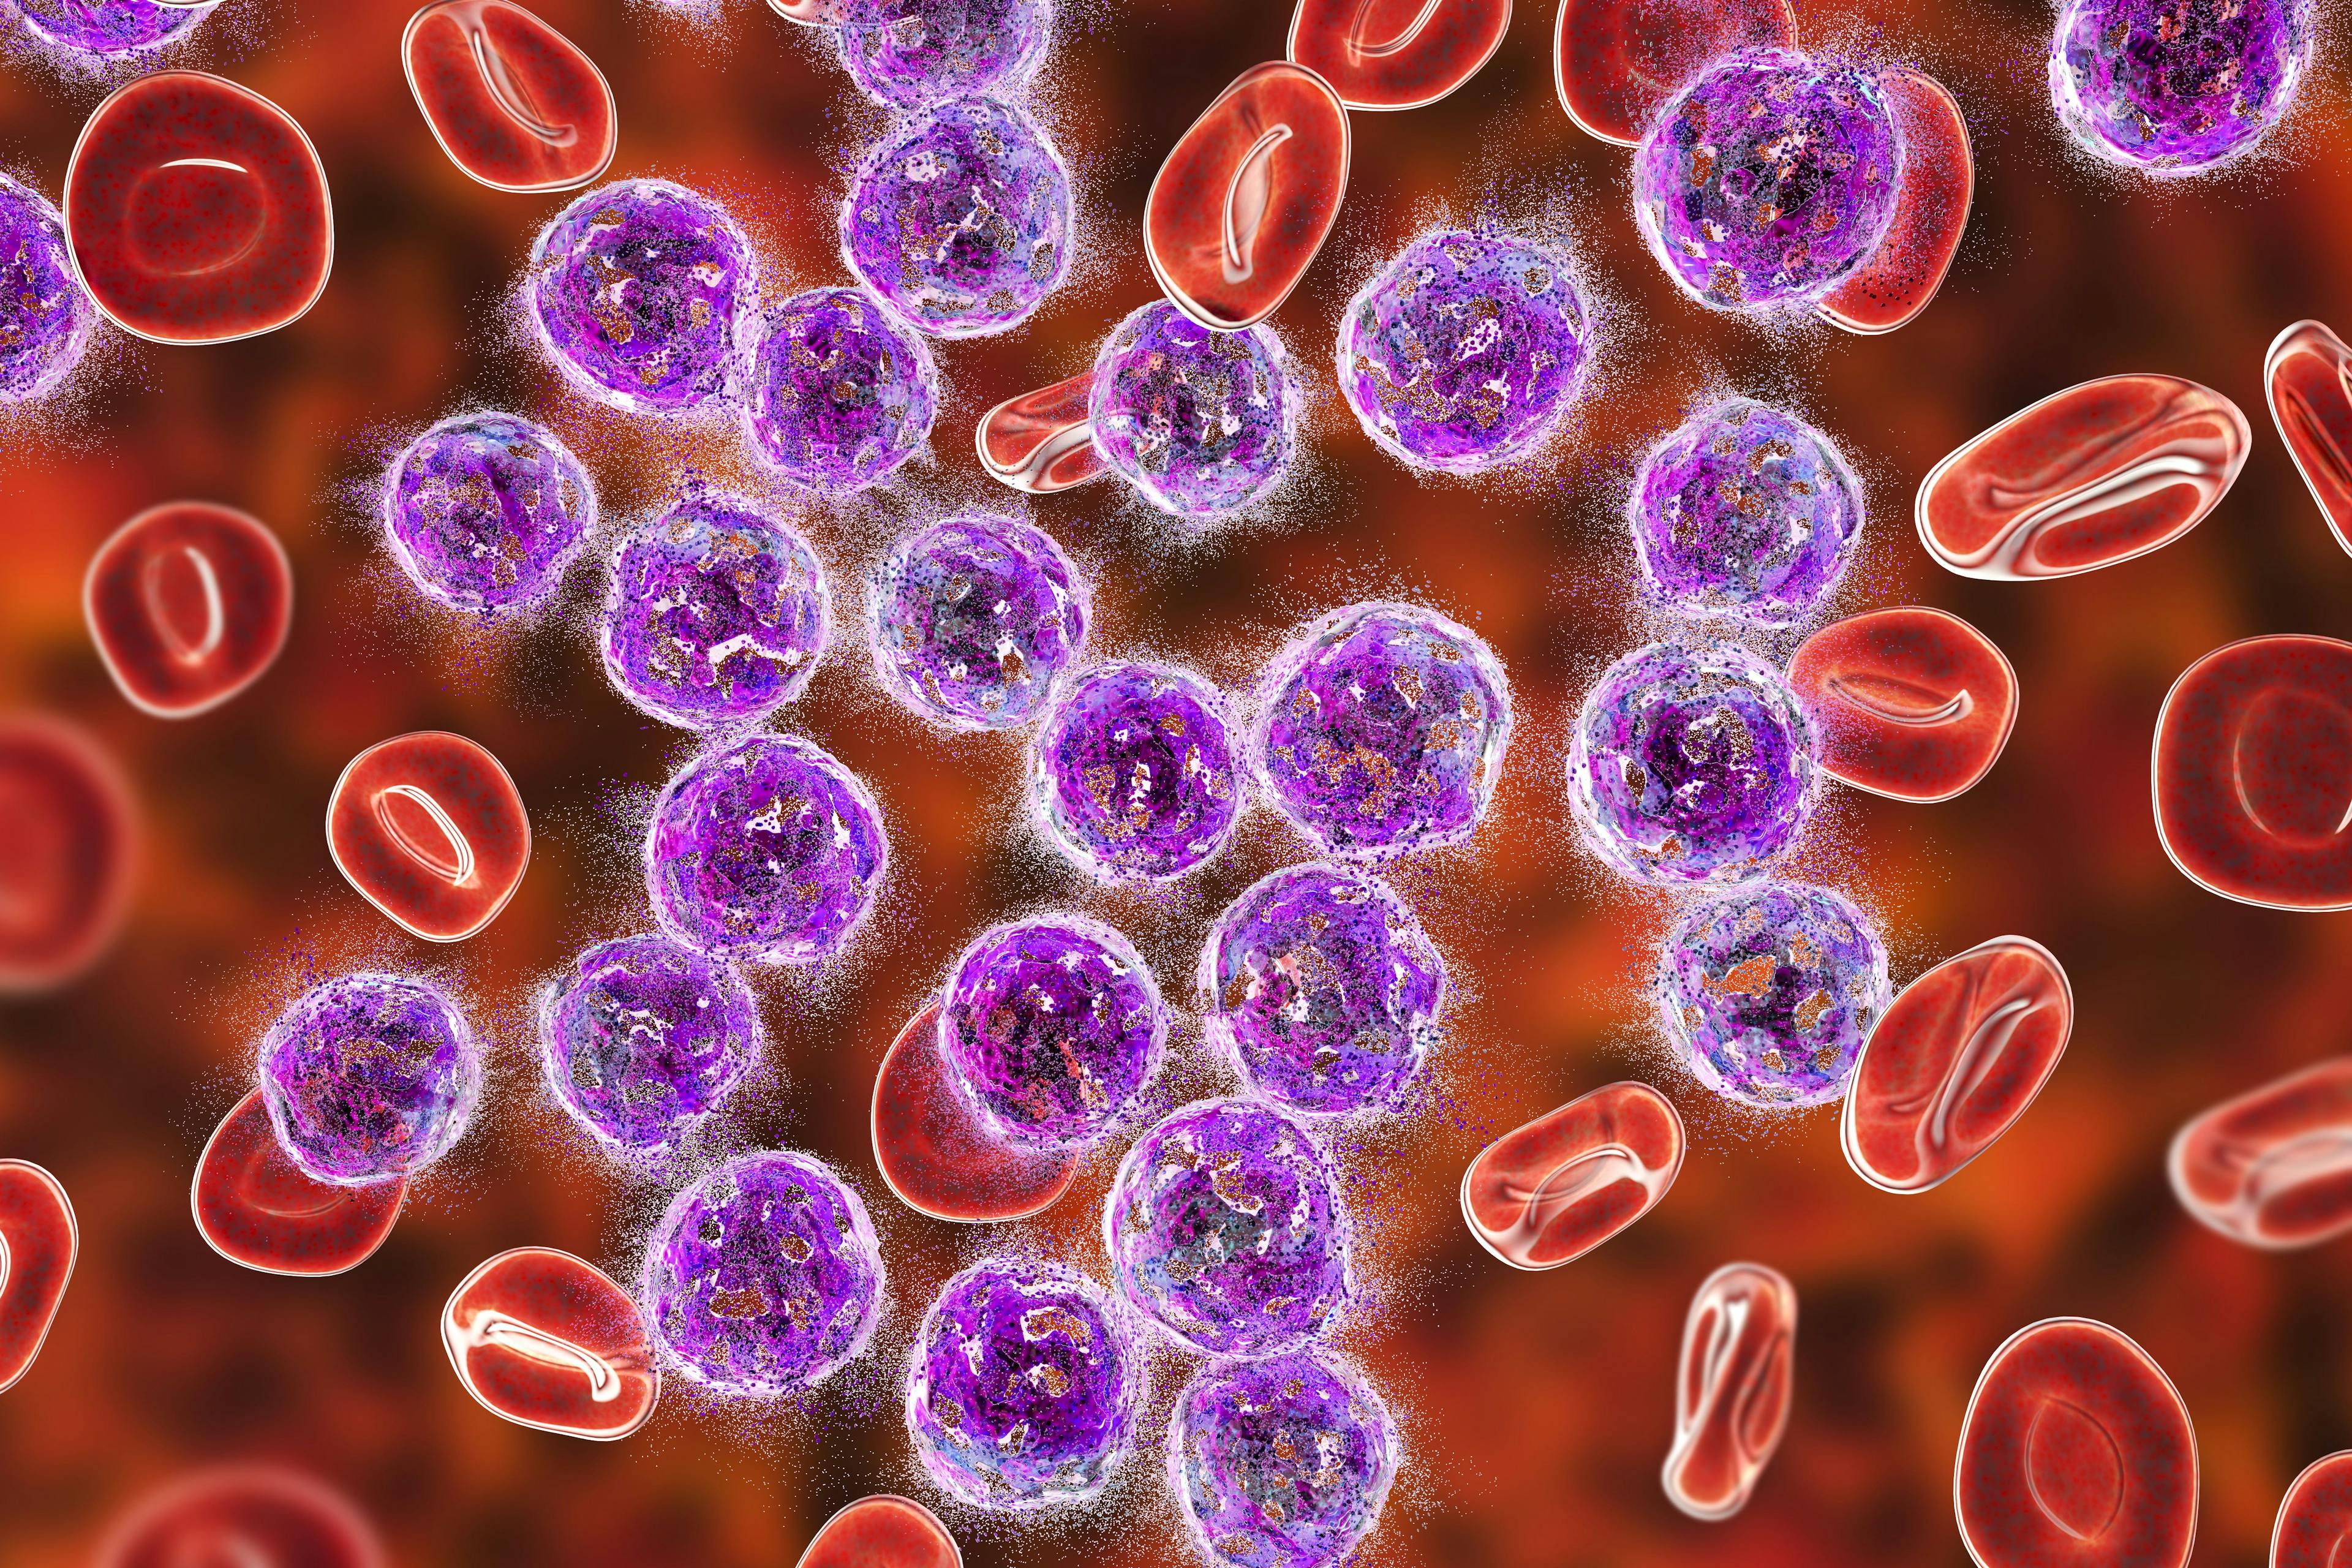 CAR T-Cell Therapy and Others Refresh Acute Myeloid Leukemia Treatment Landscape